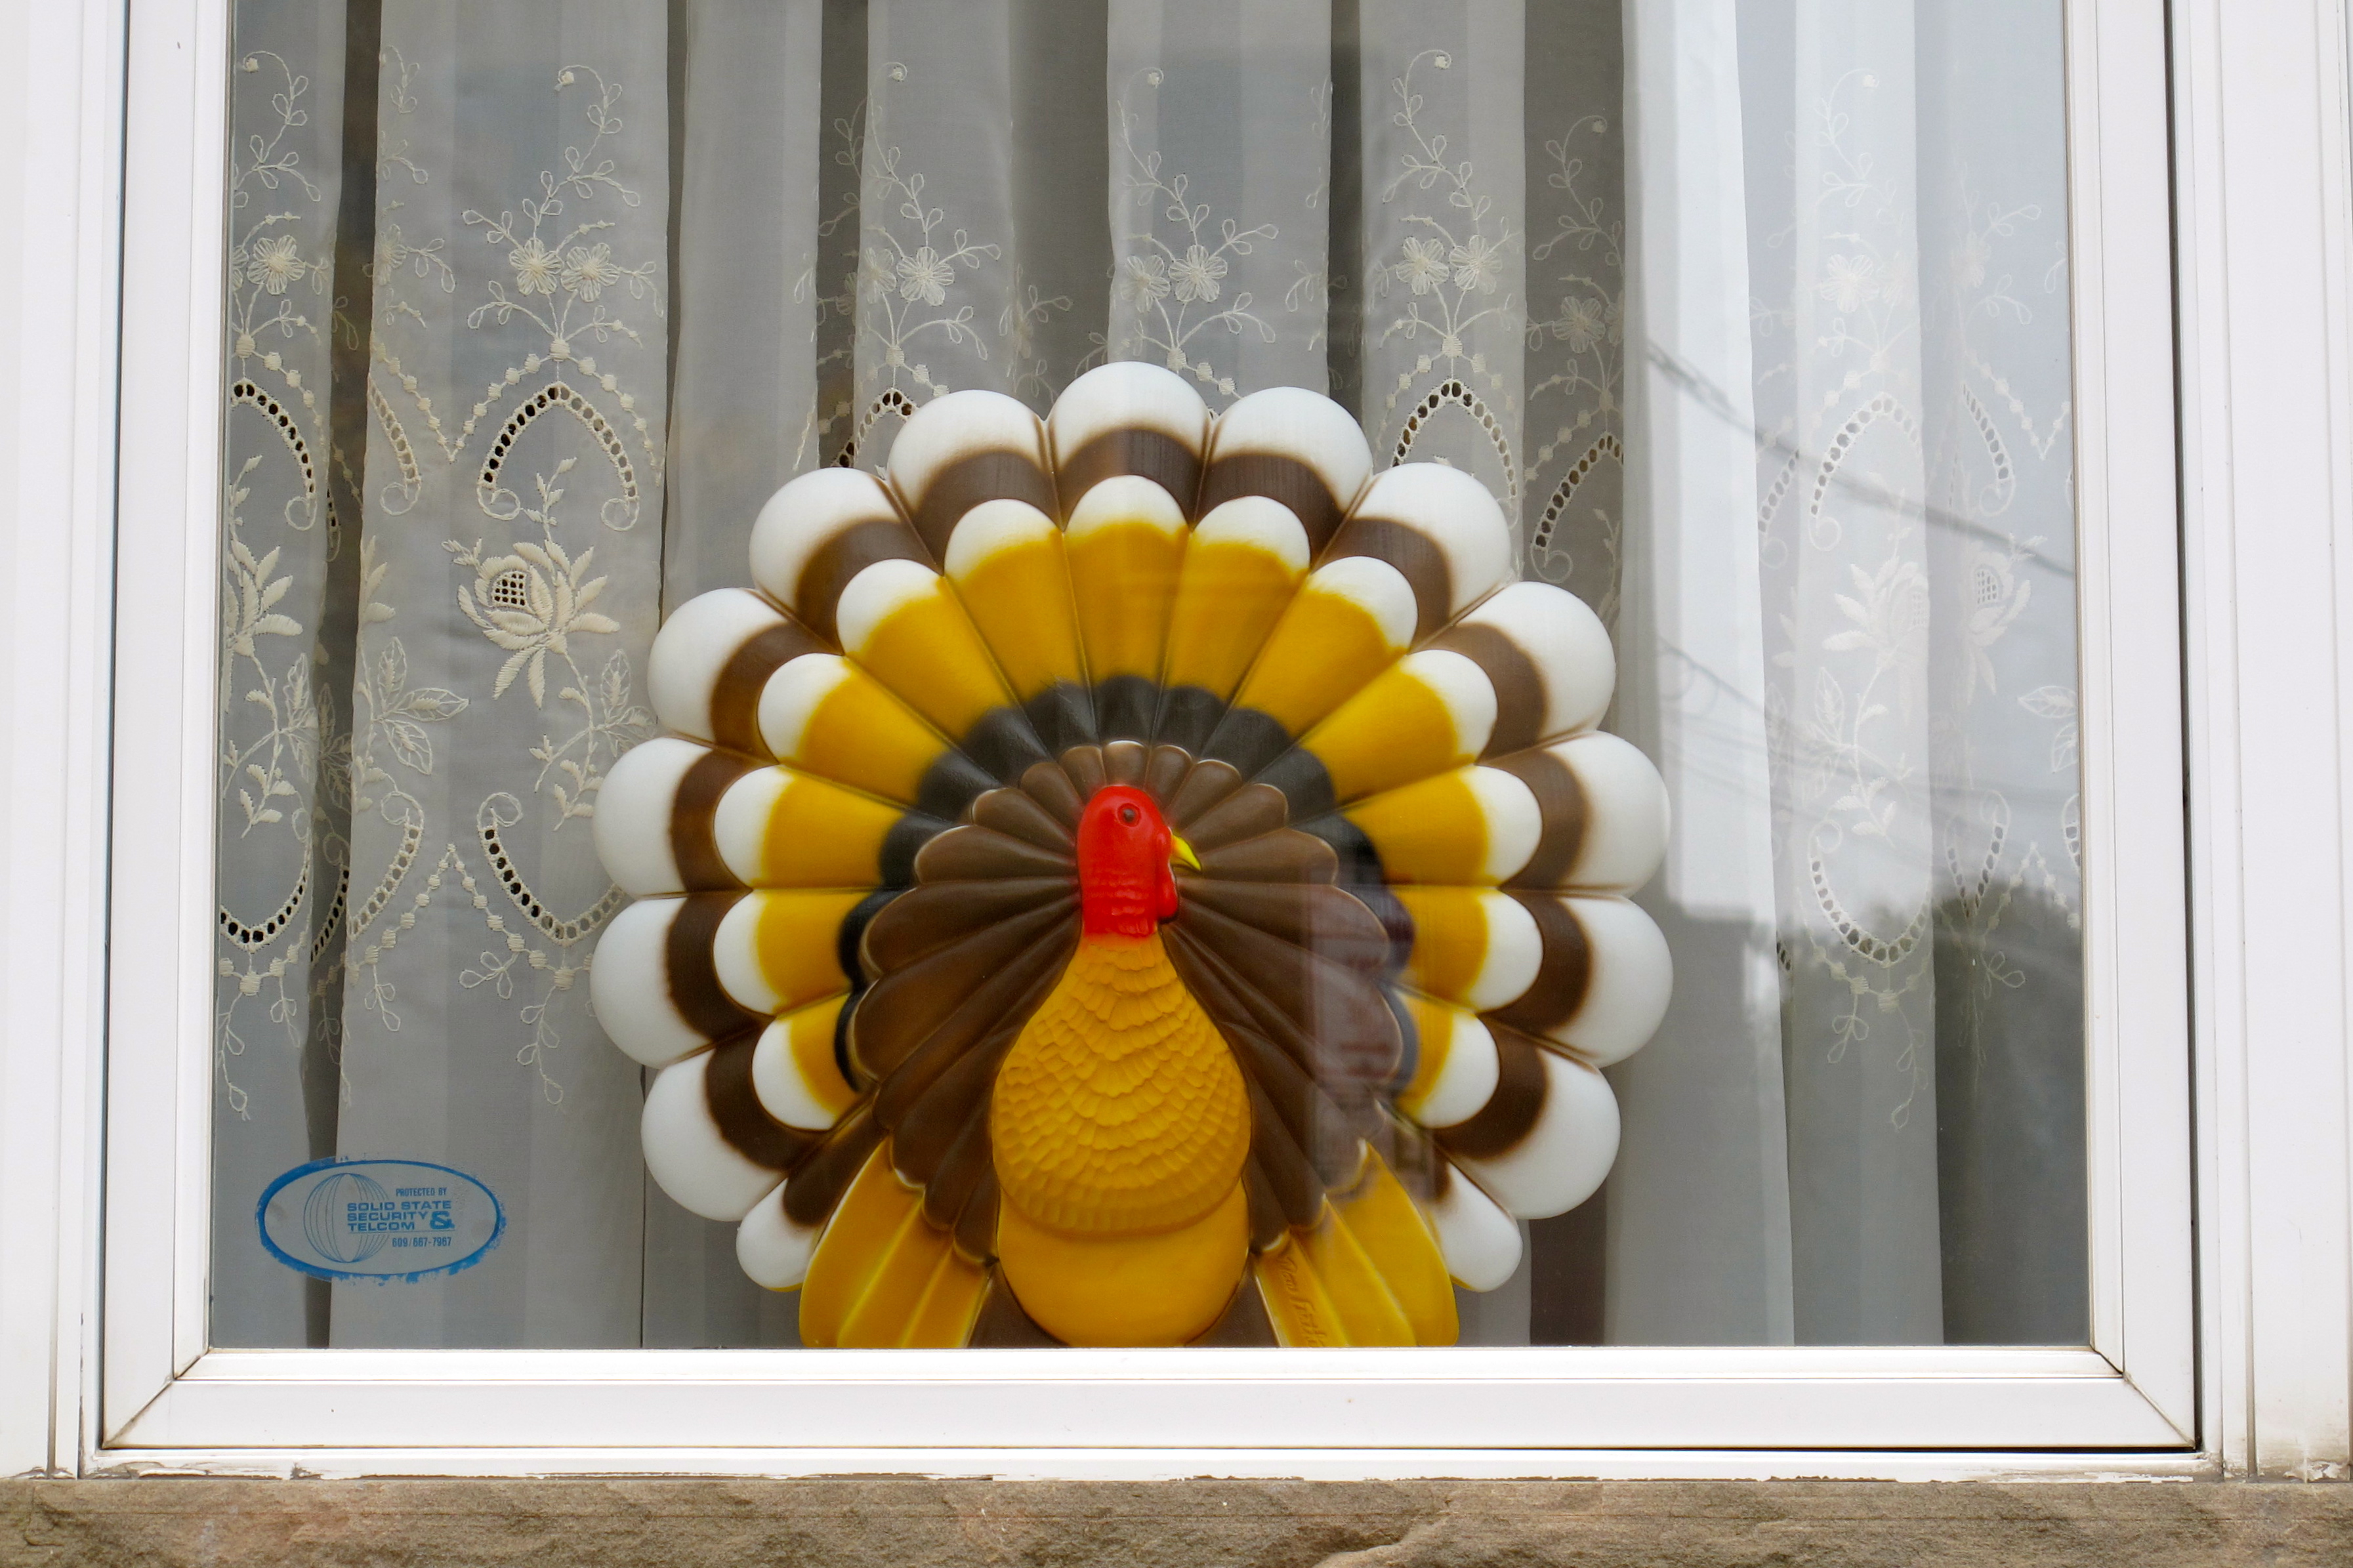 The safest turkey of all.